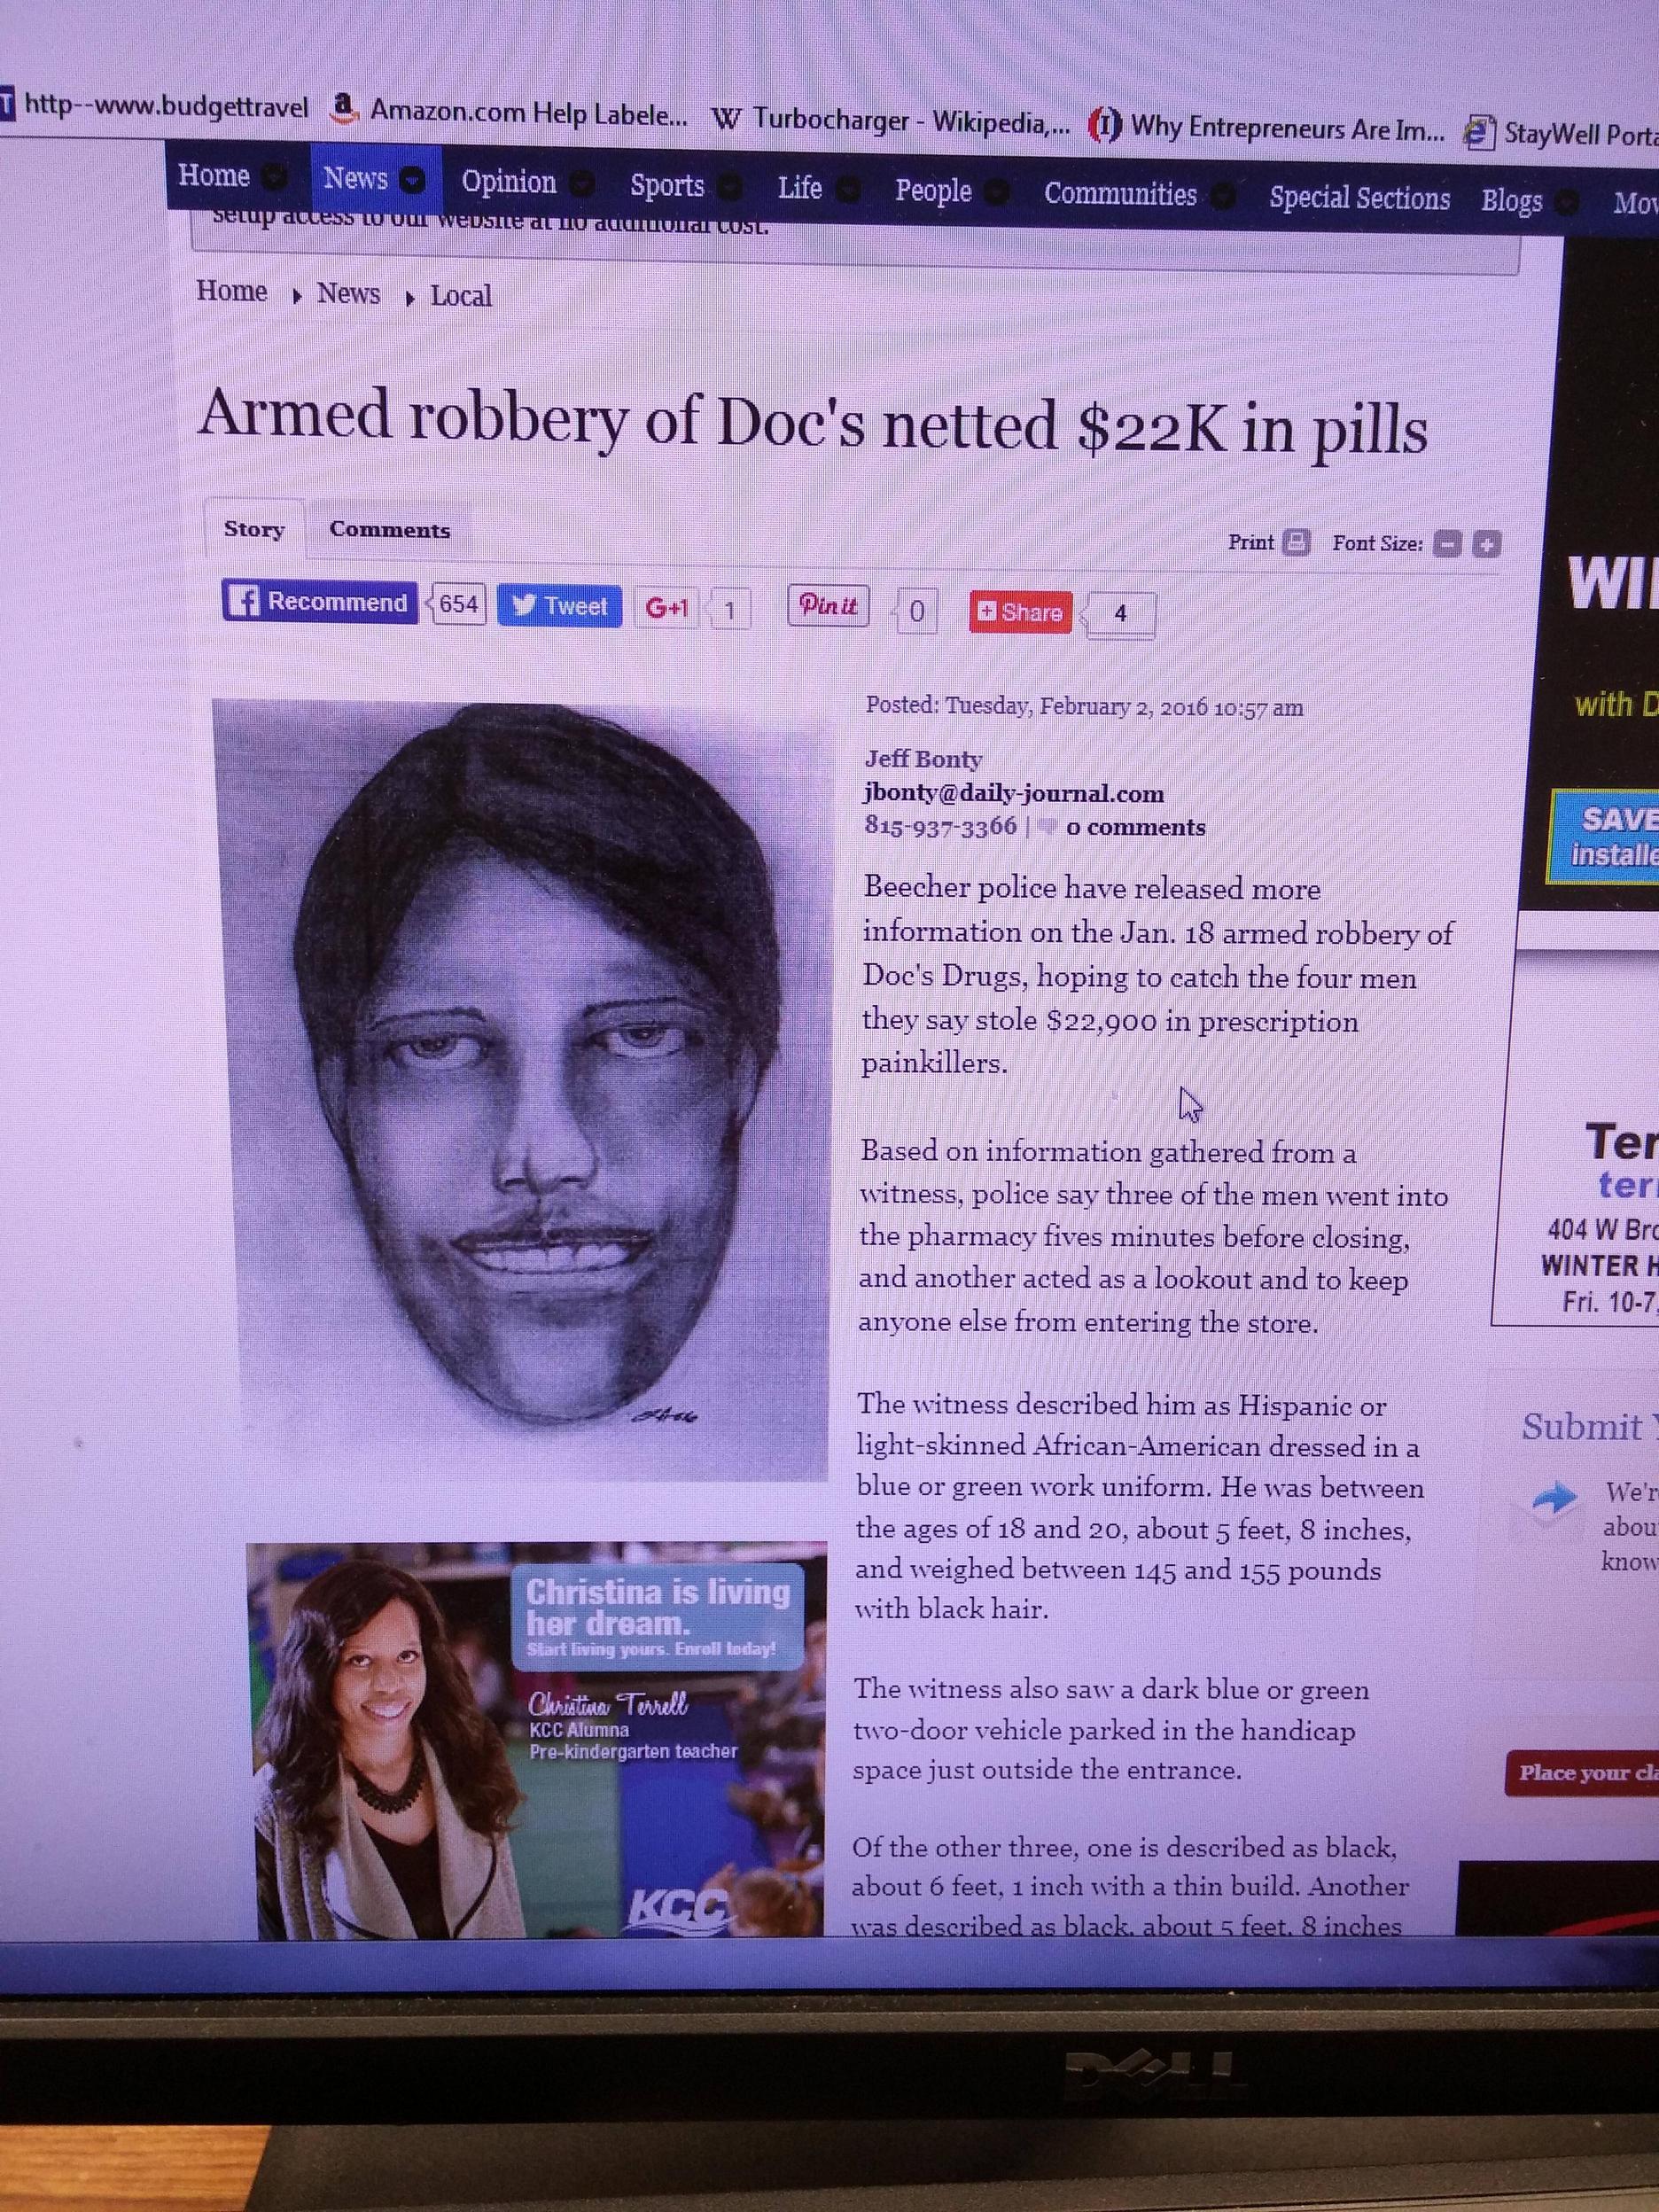 display device - Home Aman.com News Opinim ble w Tubiger We parts ple y e r Wel Port Special Sections Blog Car e lac Armed robbery of Doc's netted $22K in pills Wii with Save der als Jeff at jhse B59373966 Beecher polishe d mom indormation on the Jan 15 a